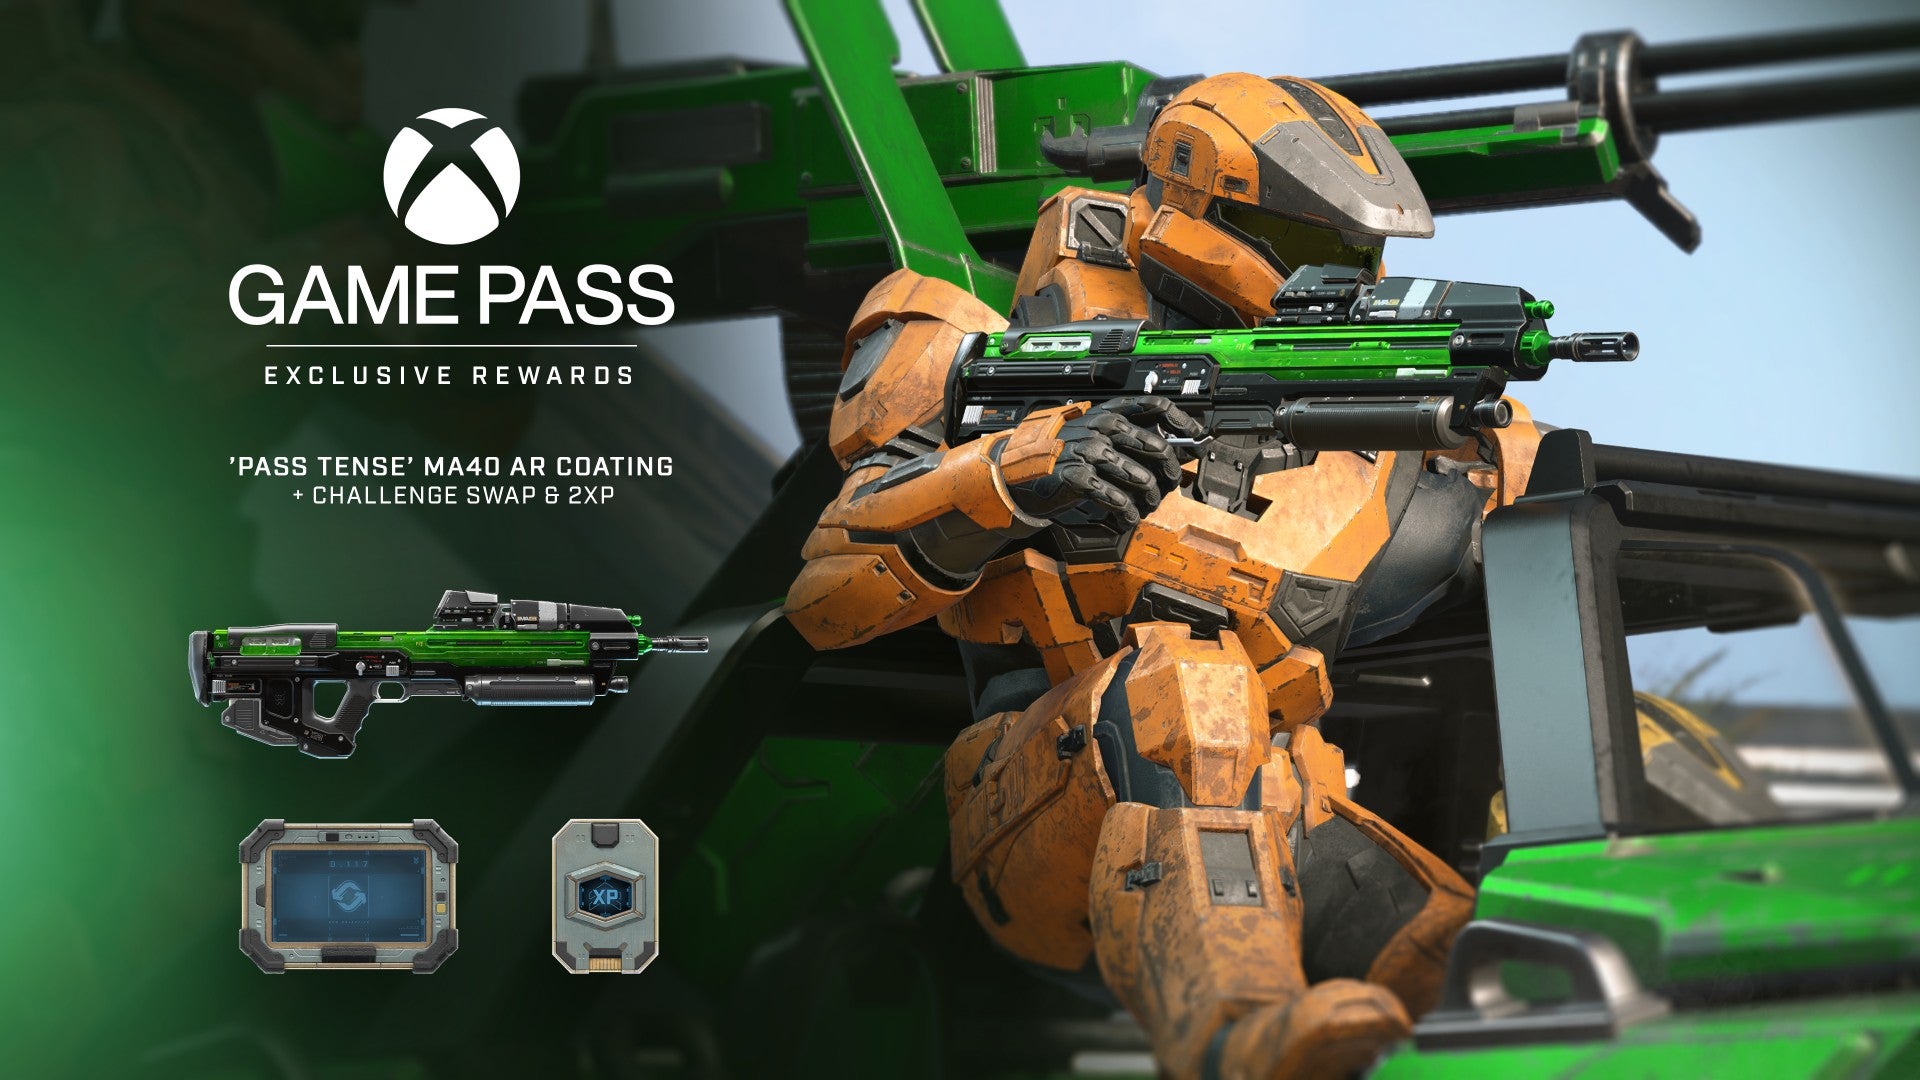 Xbox Game Pass Ultimate subscribers get monthly Halo Infinite Multiplayer bonuses